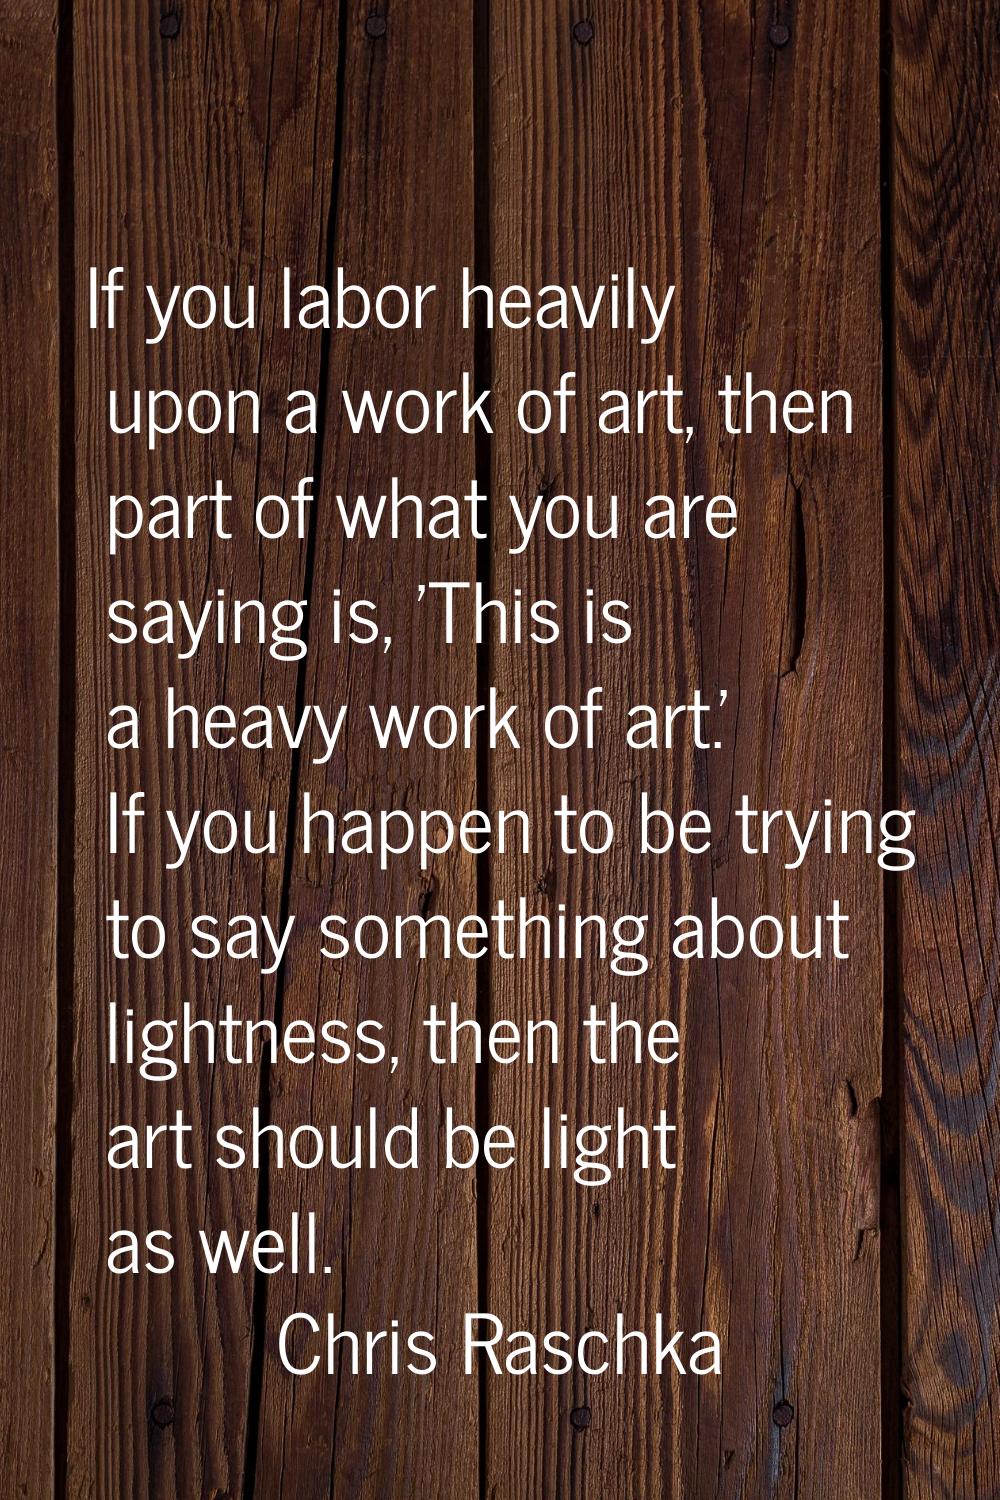 If you labor heavily upon a work of art, then part of what you are saying is, 'This is a heavy work